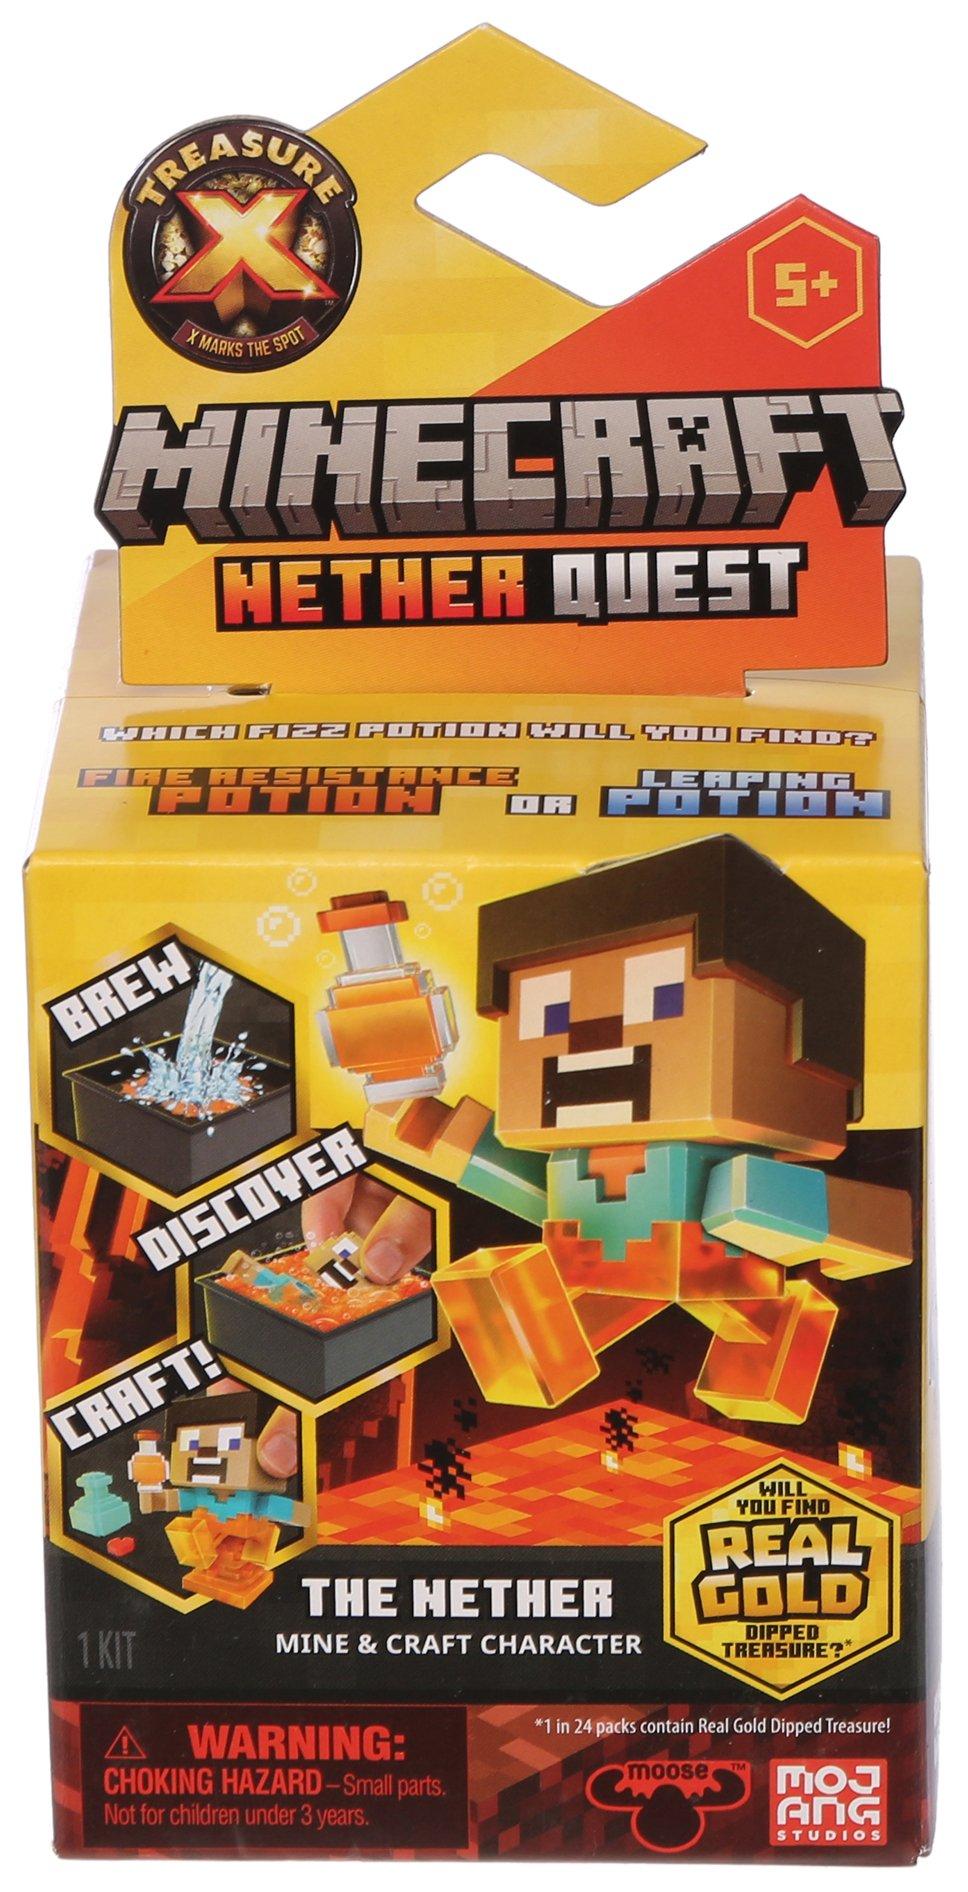 Nether Quest Mine and Craft Character Pack